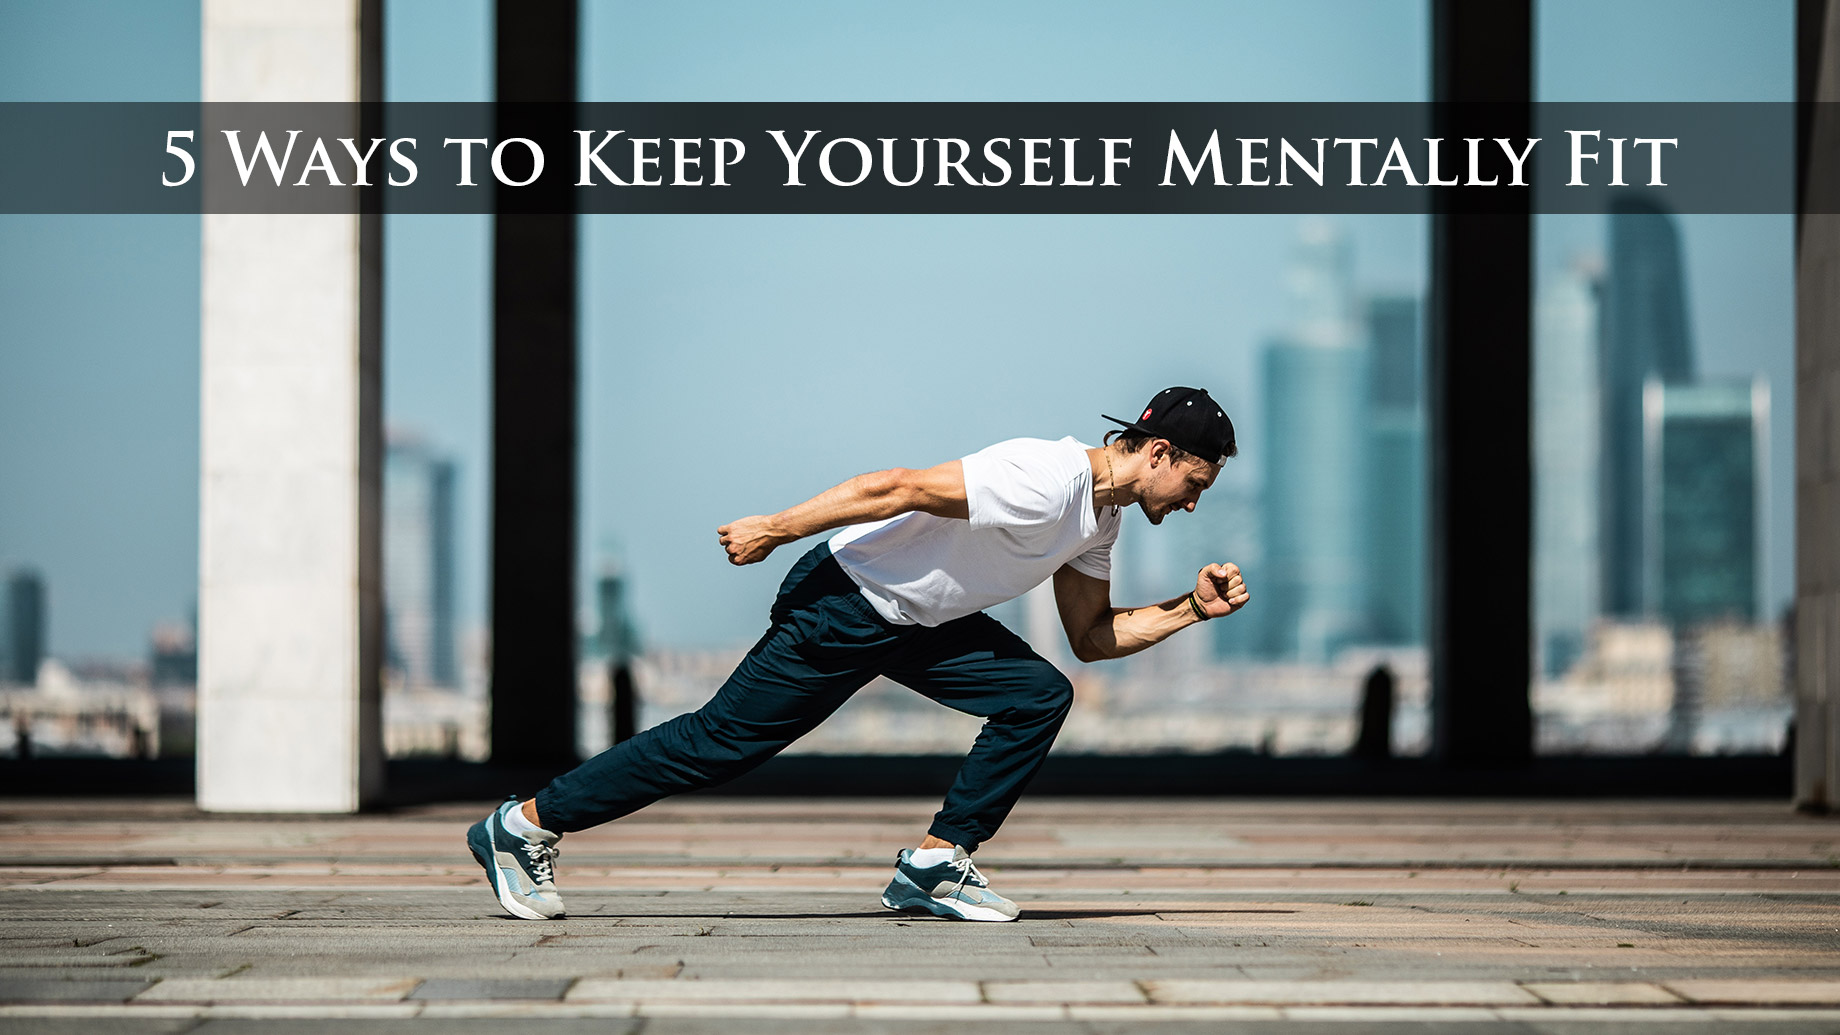 5 Ways to Keep Yourself Mentally Fit